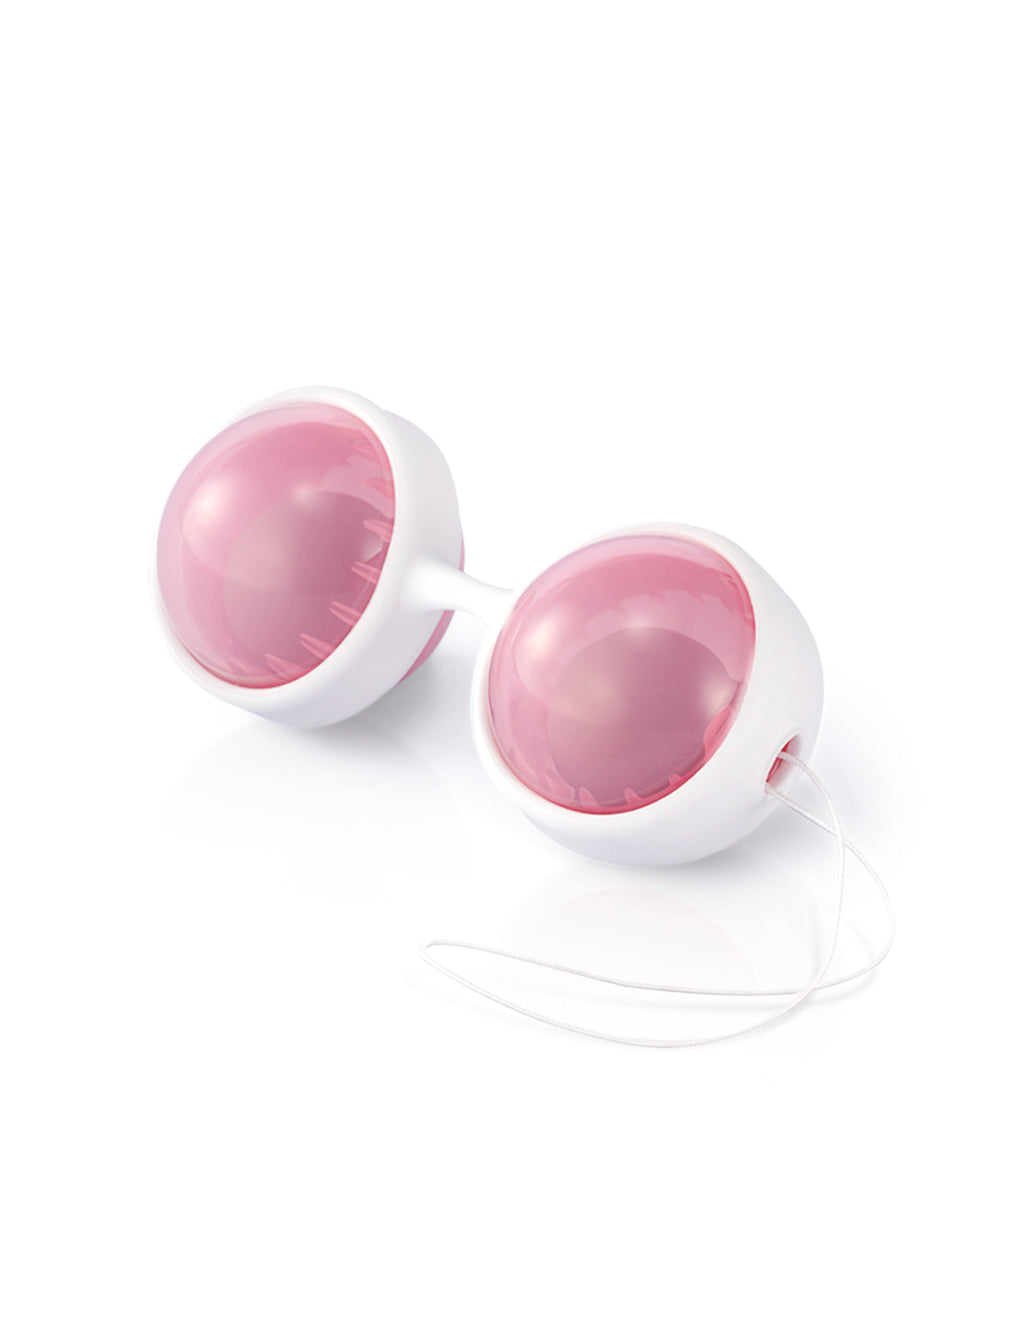 Lelo Beads Plus- Pink Beads- Front